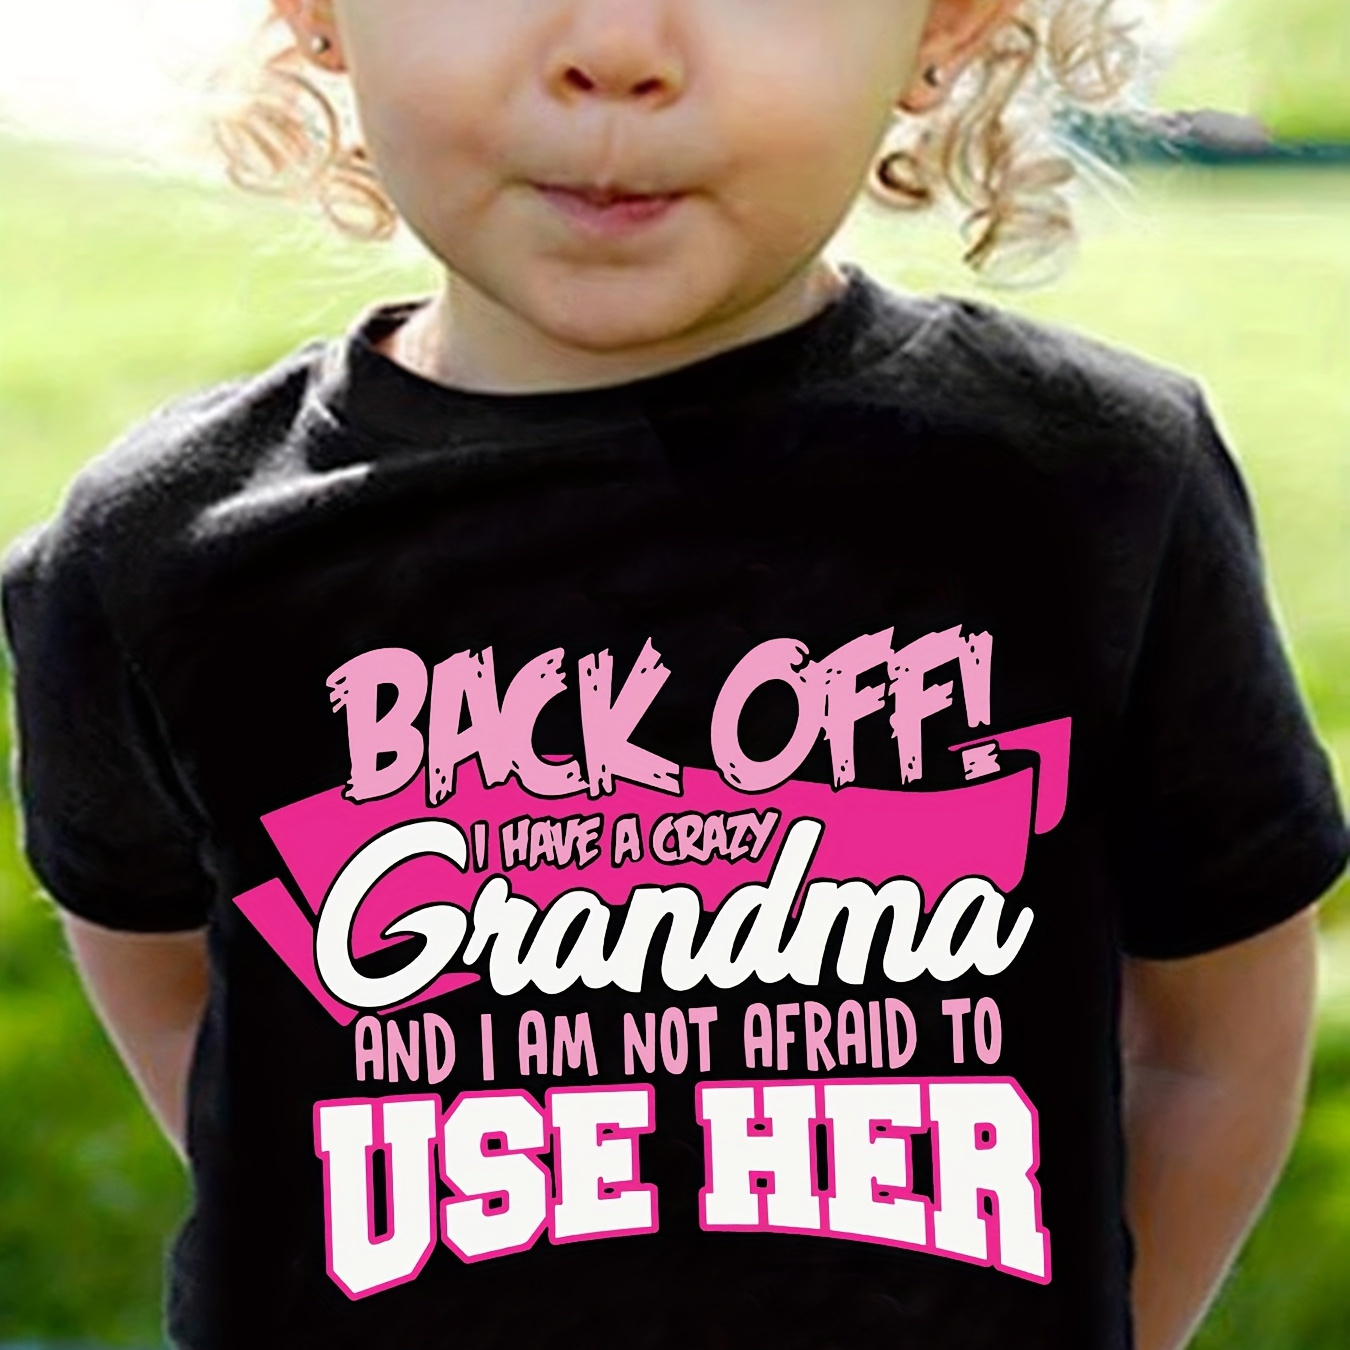 

Back Off I Have A Crazy Grandma... Print Short Sleeve T-shirt, Girls Comfy Tees Pullover For Summer Gift